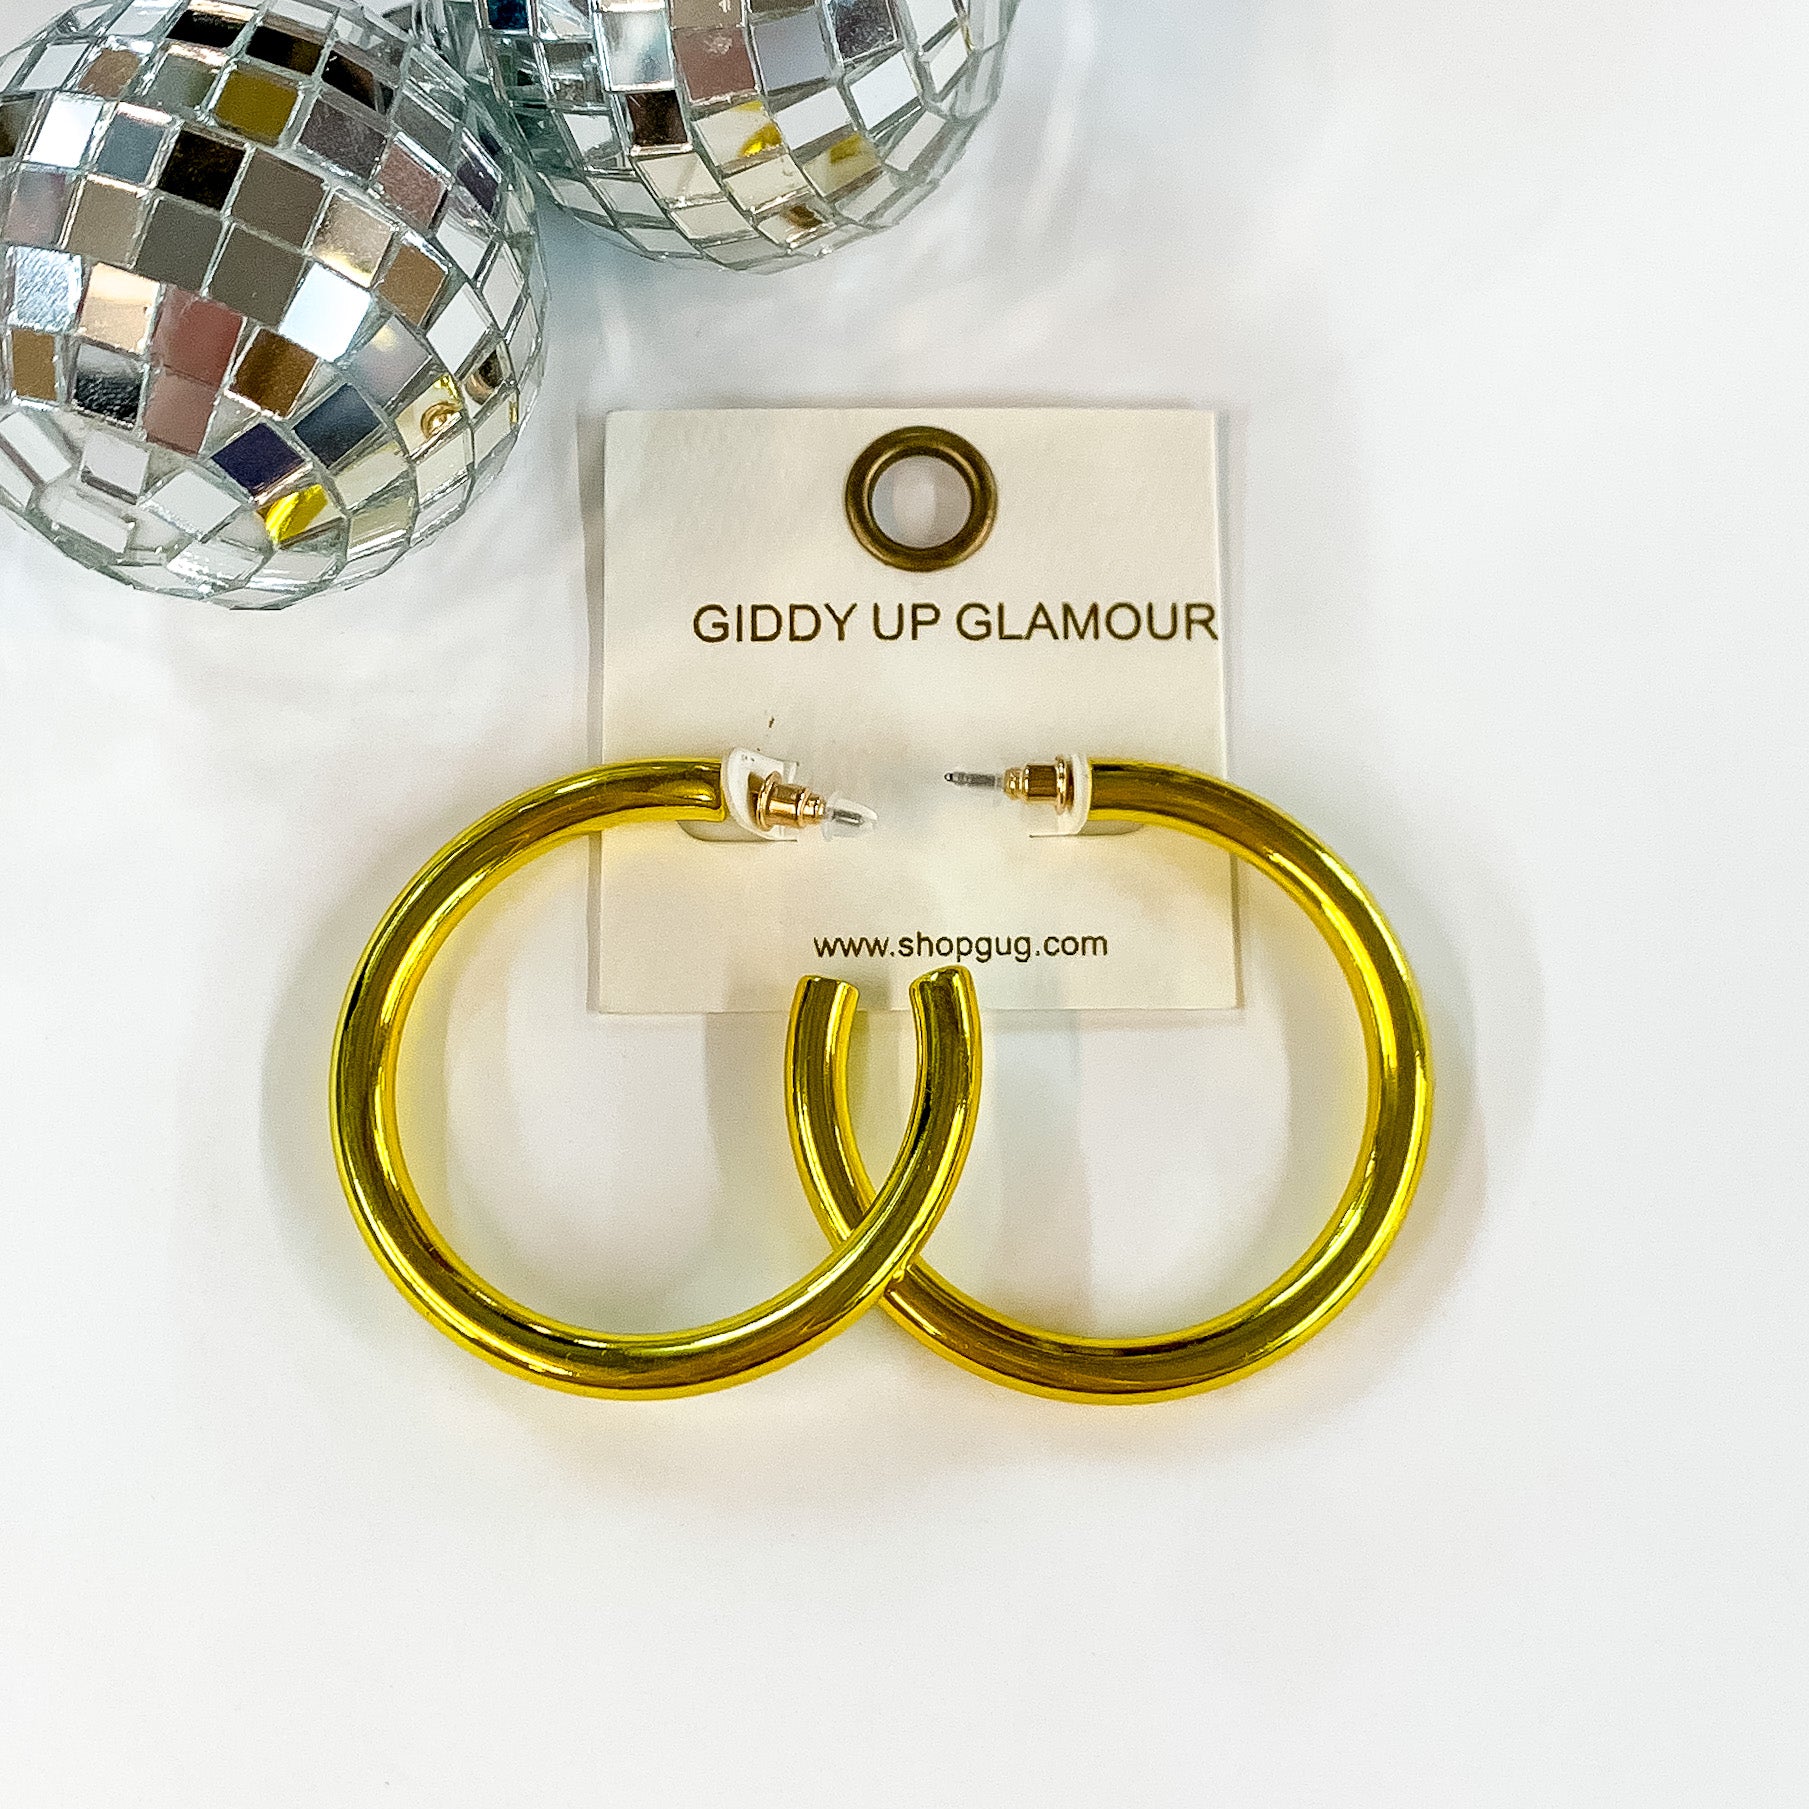 Light Up Large Neon Hoop Earrings In Yellow. Pictured on a white background with a disco ball in the top left corner.